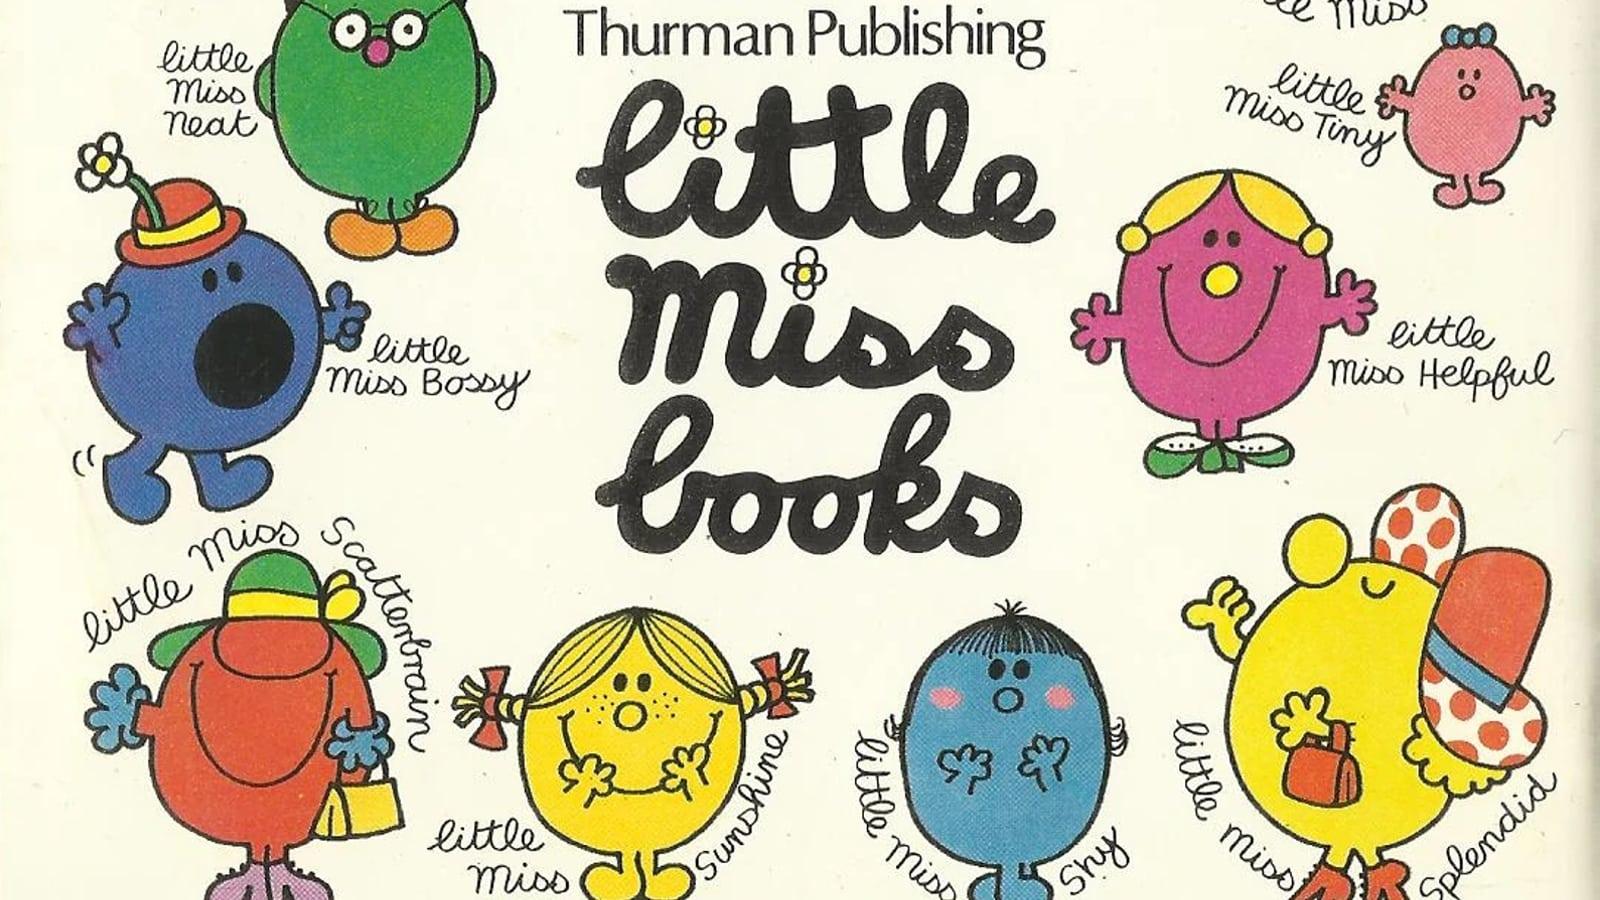 'Little Miss' characters on a book